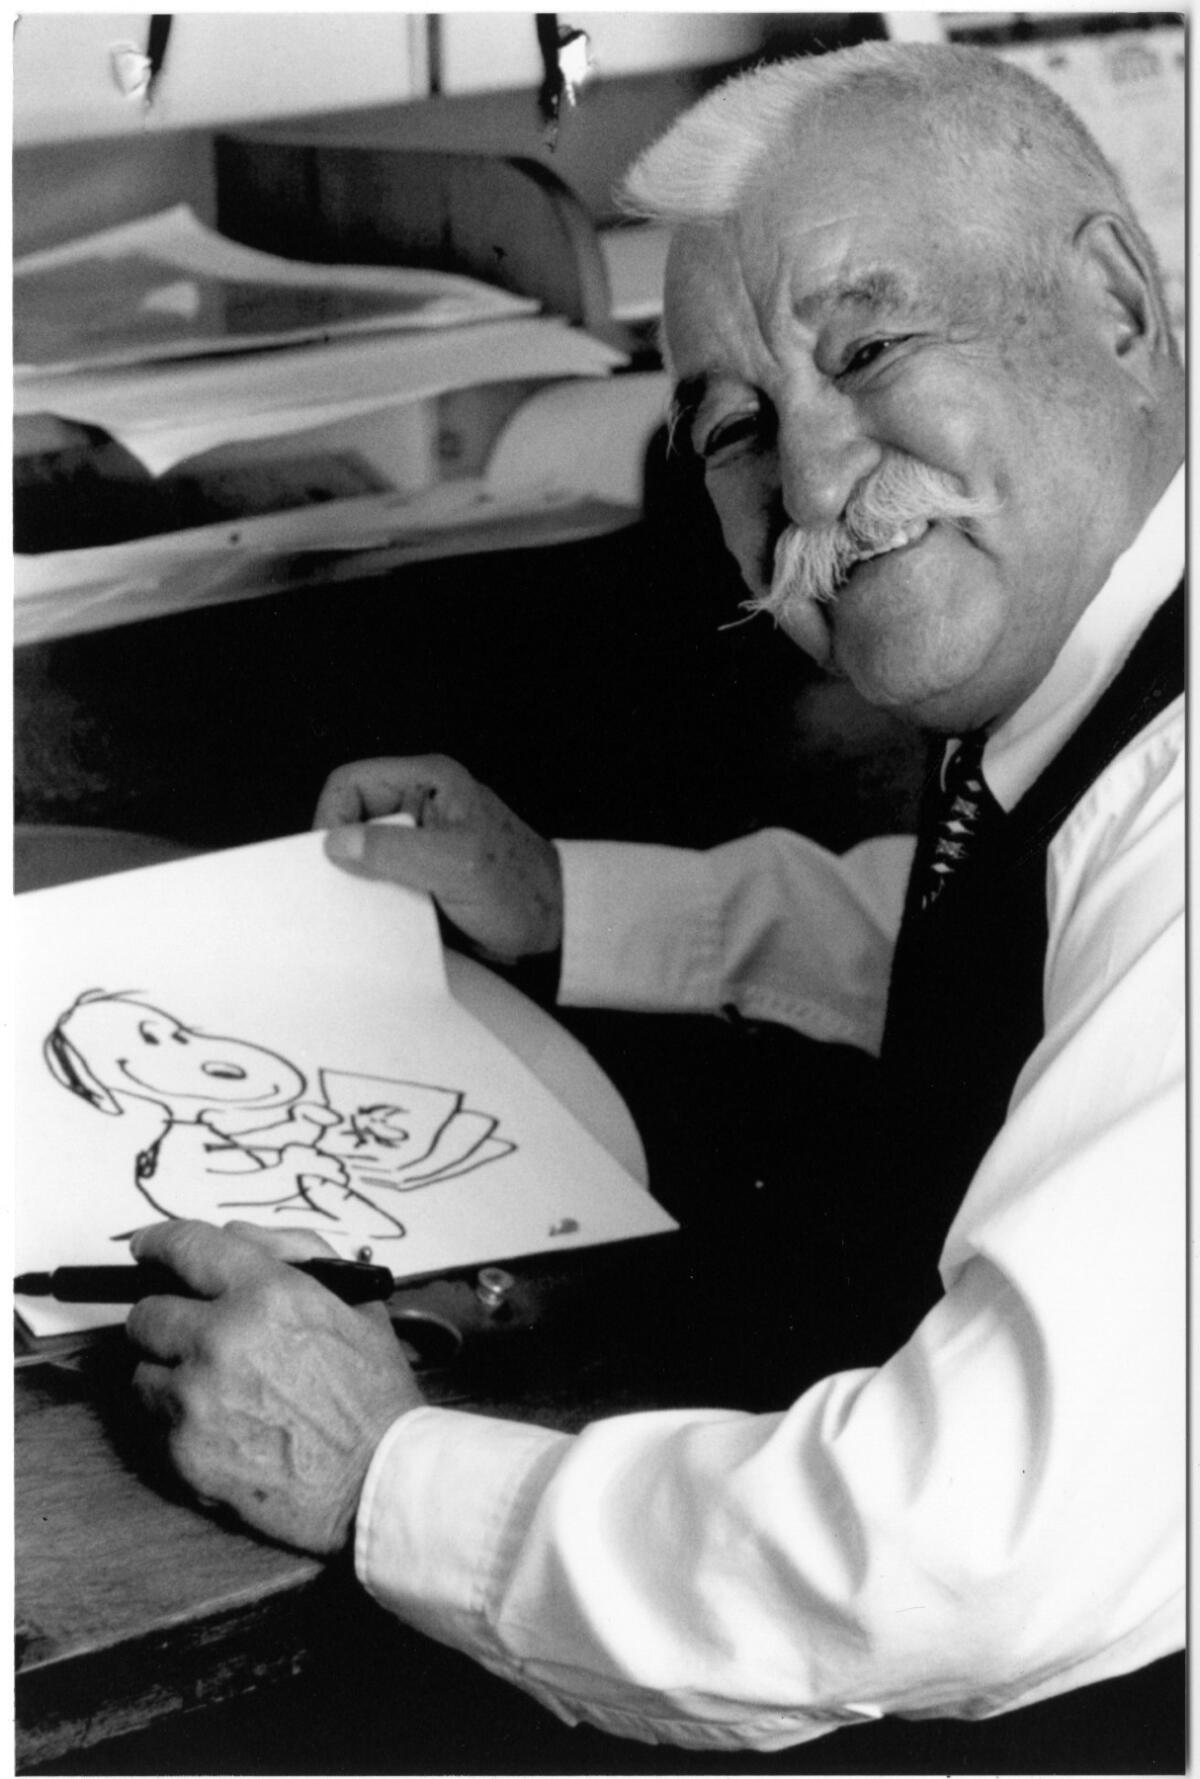 Bill Melendez was an animator for nearly 70 years, working on Disney's "Fantasia" and Warner Bros.' "Merrie Melodies" before opening his animation studio, which produced more than 70 "Peanuts" specials and films.